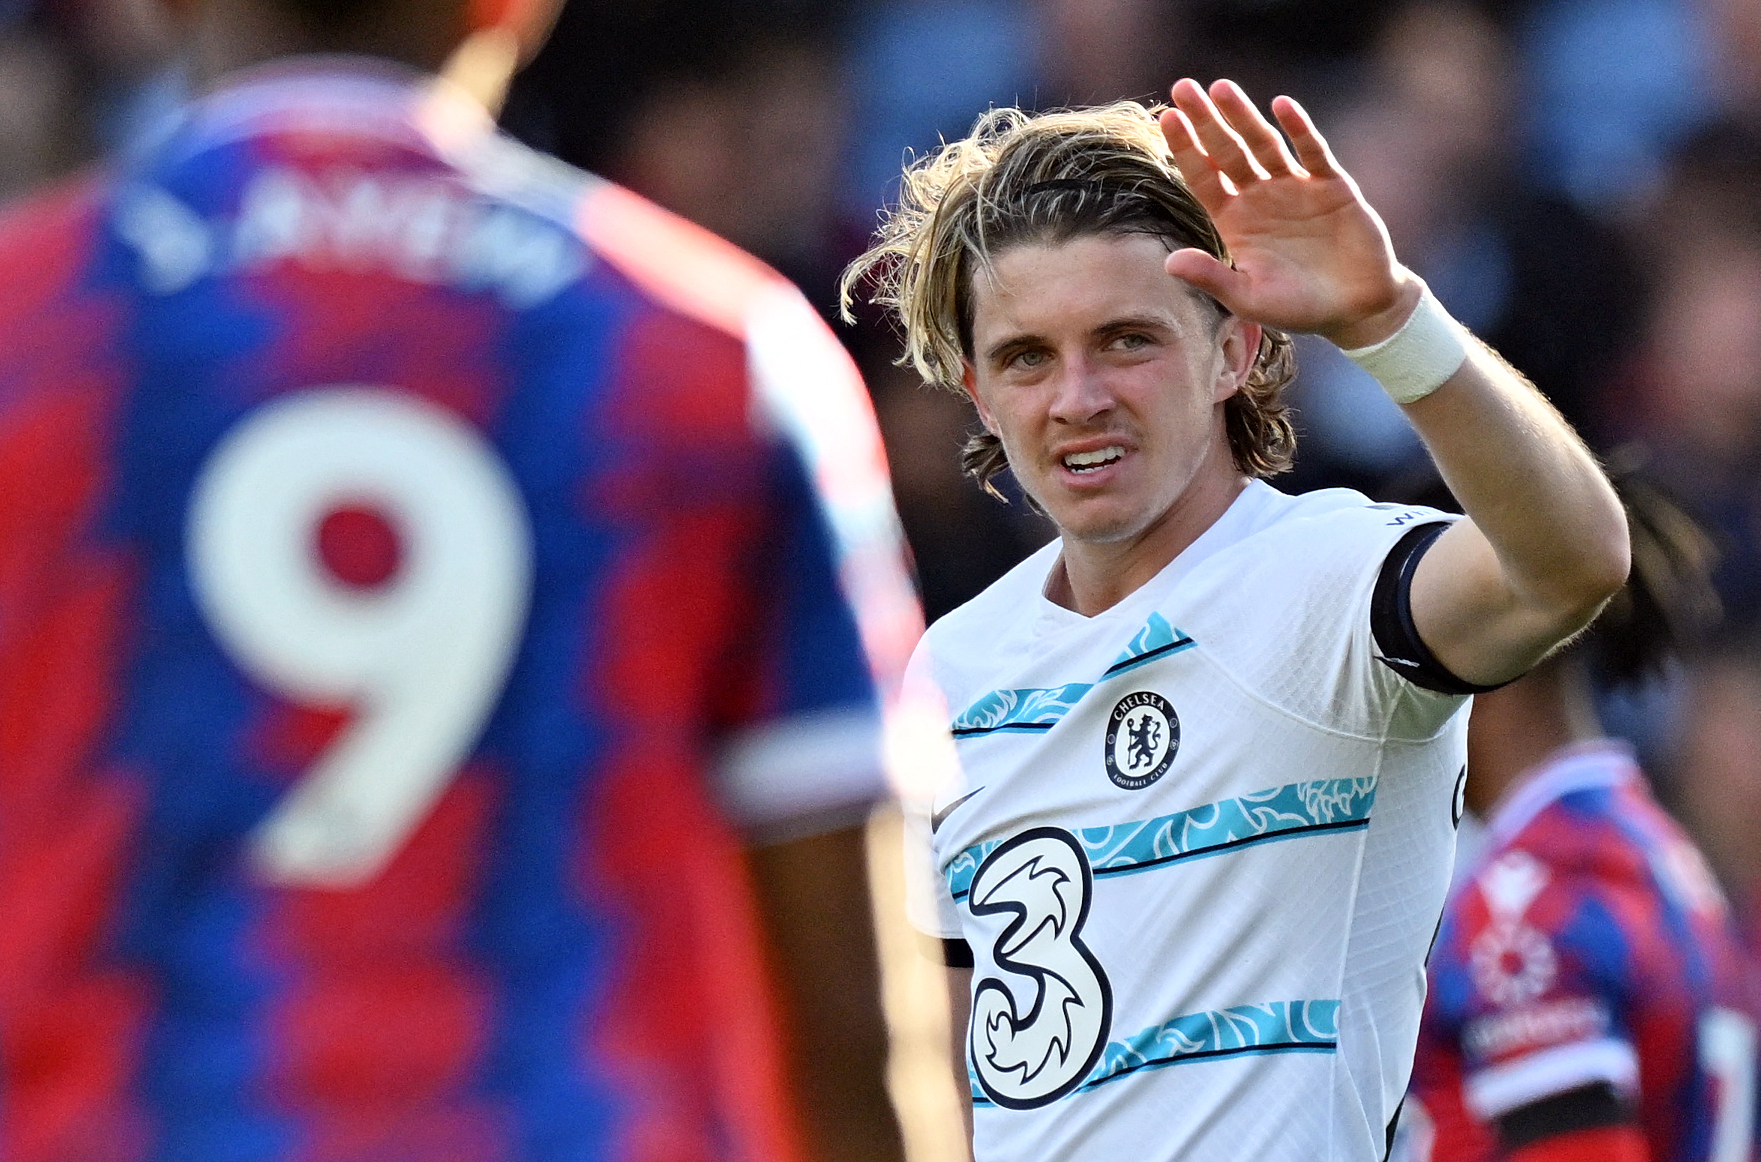 Chelsea’s Conor Gallagher scored his first goal for the club in a win against Crystal Palace. (Photo by GLYN KIRK/AFP via Getty Images)